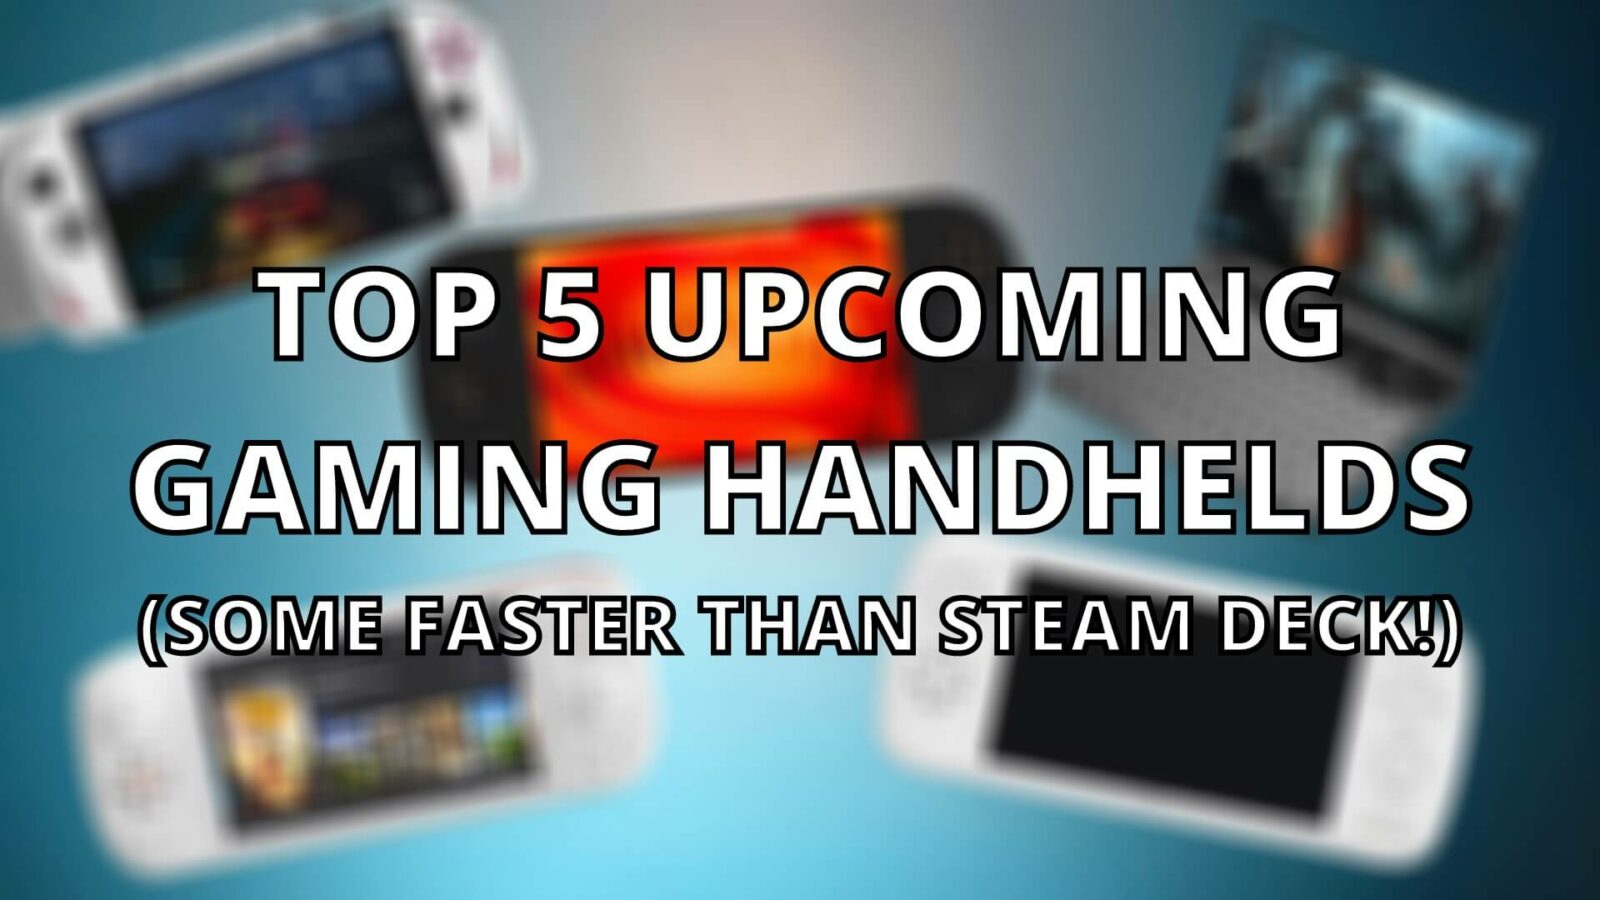 Top 5 PC Gaming Handhelds of 2022 with video | DroiX Blogs | Latest Technology and Gadgets